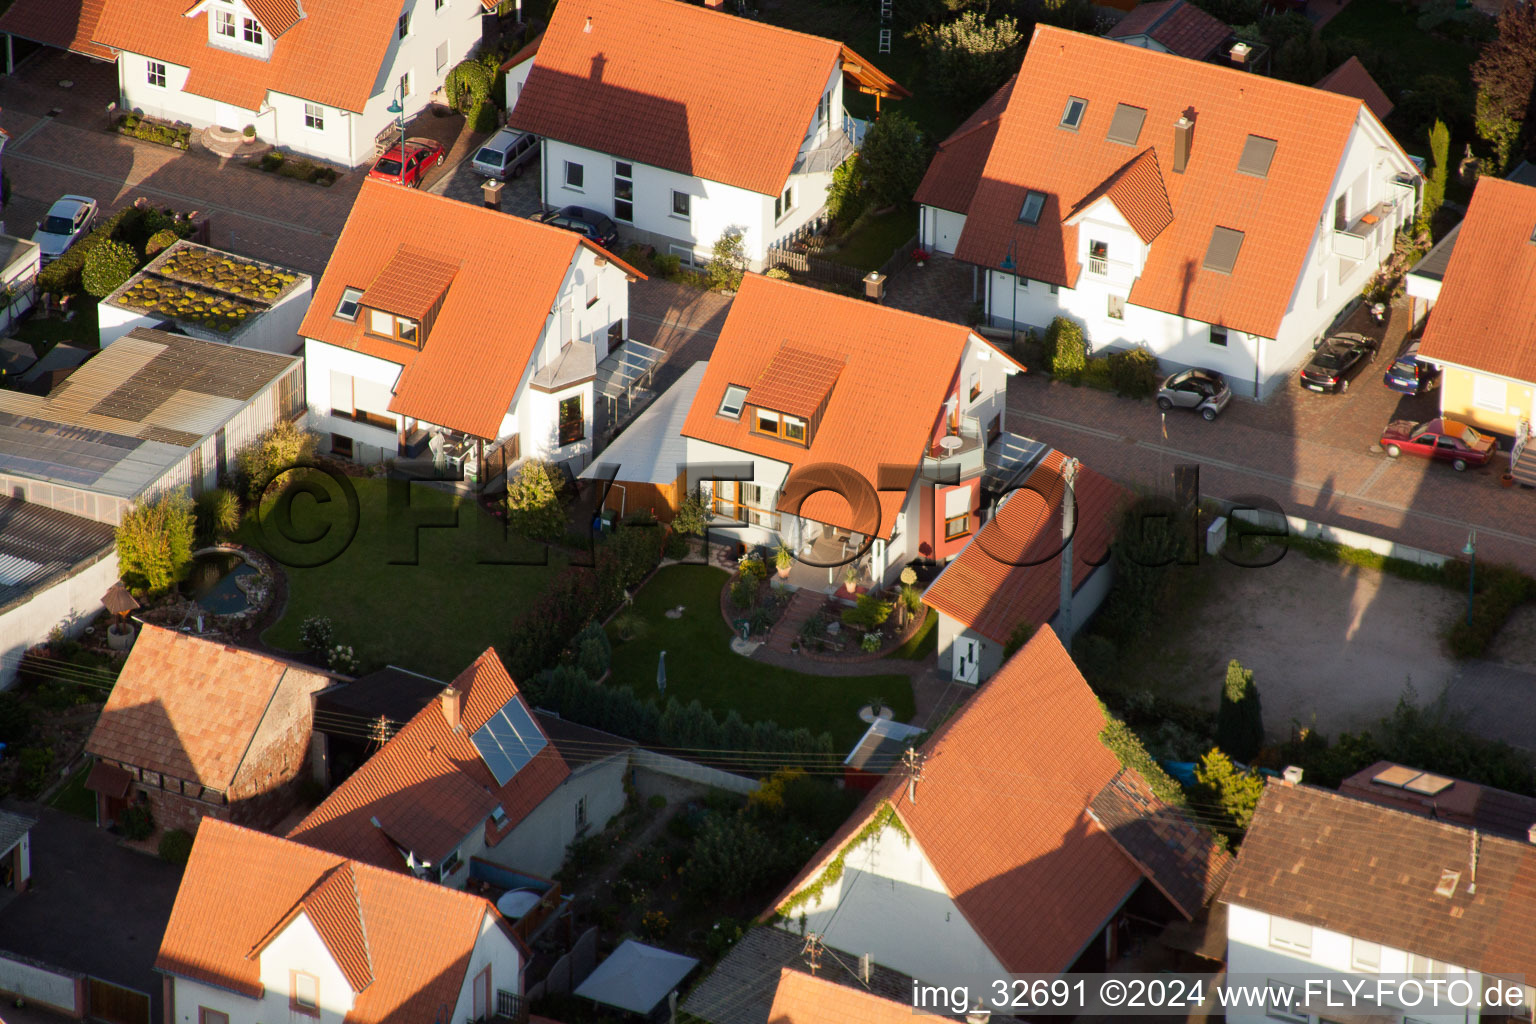 Aerial view of In the stork's nest in Erlenbach bei Kandel in the state Rhineland-Palatinate, Germany